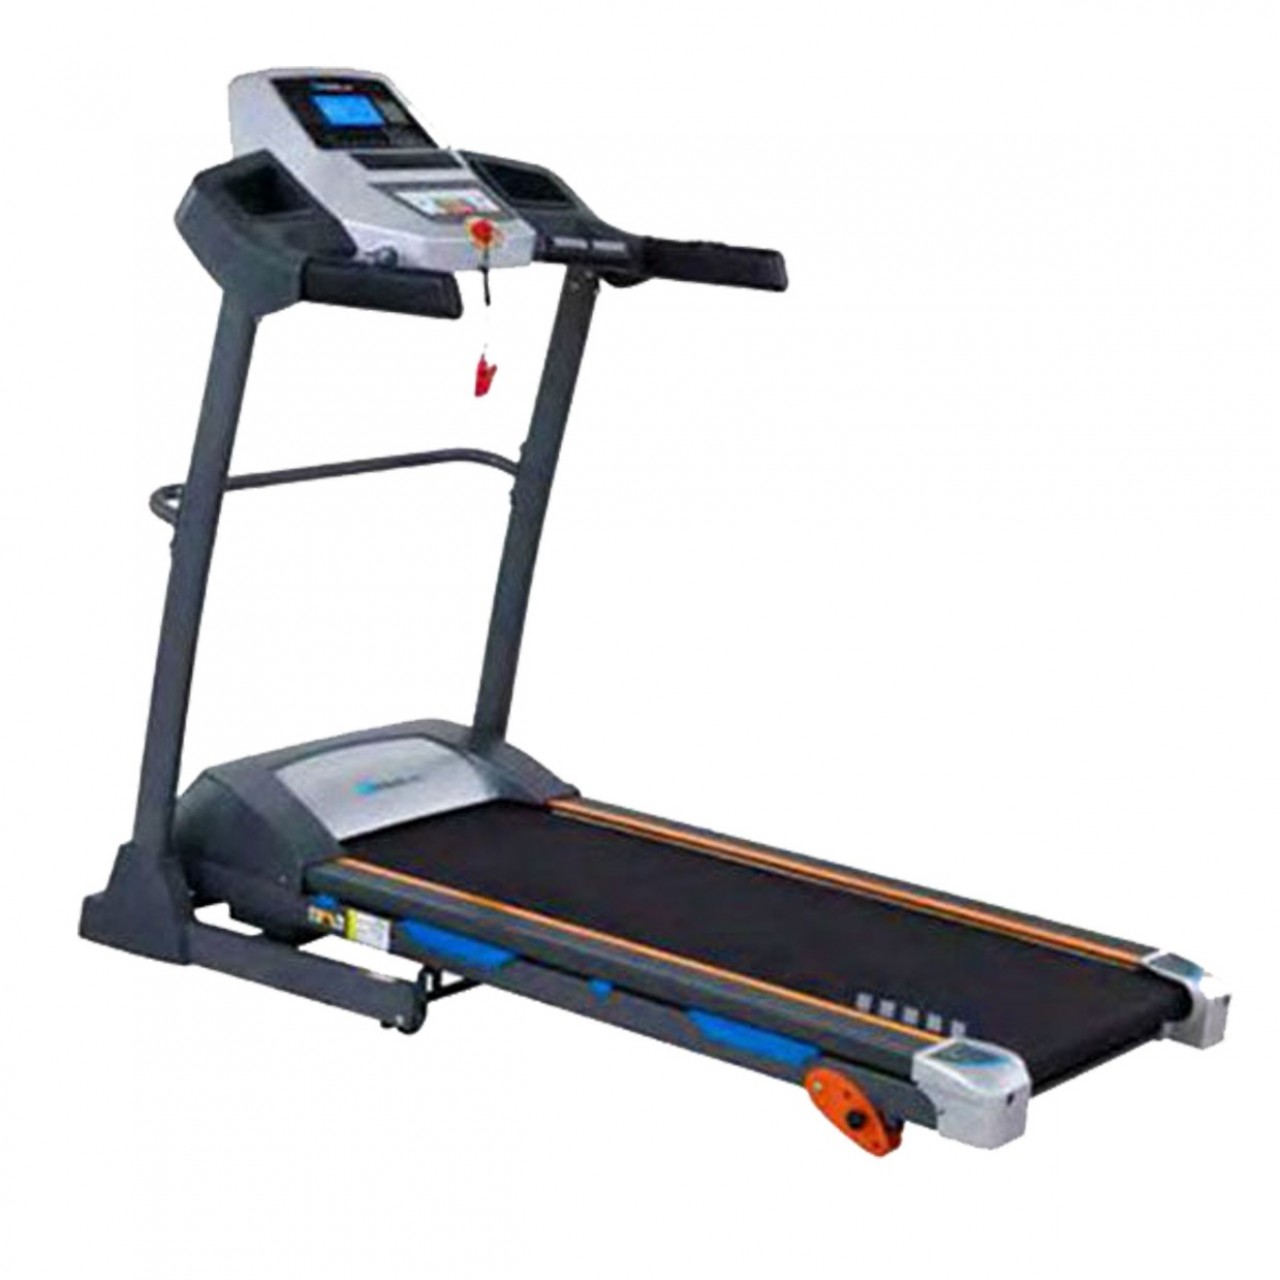 Lucky Sports Treadmill For Exercising - Holds Weight Up To 125 KG